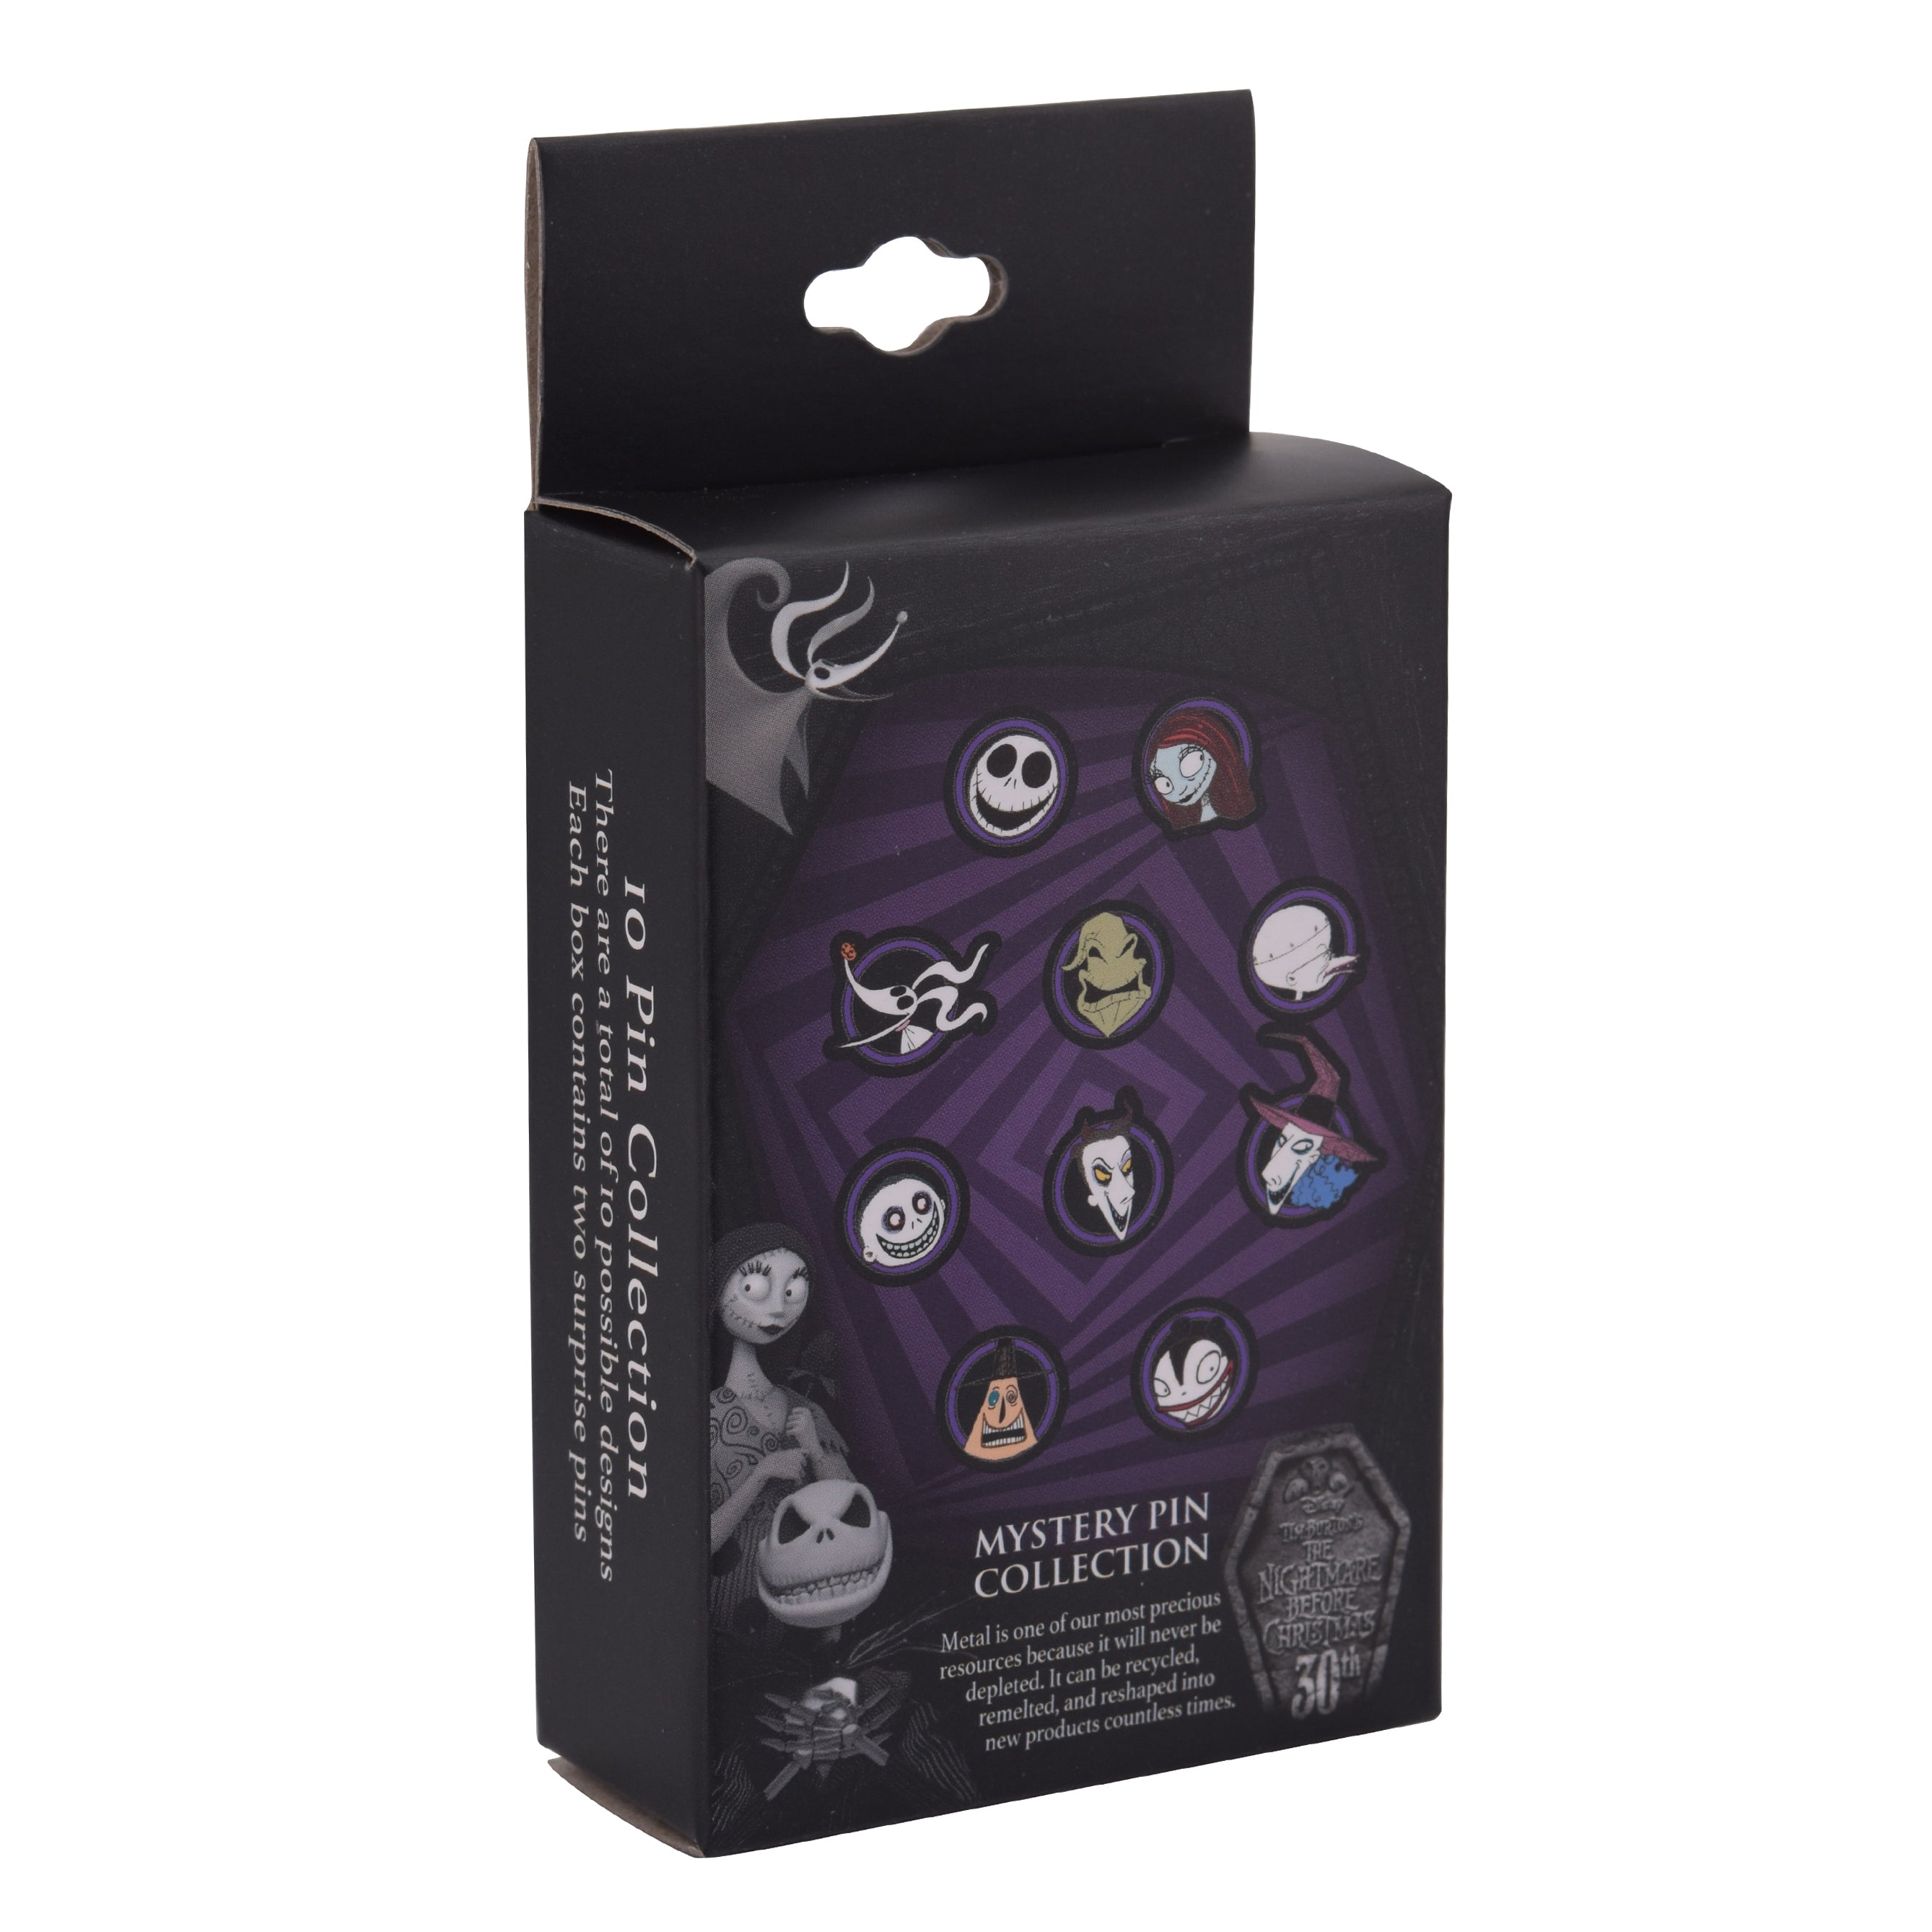 Nightmare Before Christmas 30th Anniversary Micro Mystery Pins Limited Edition 300 (2 pins per box!)